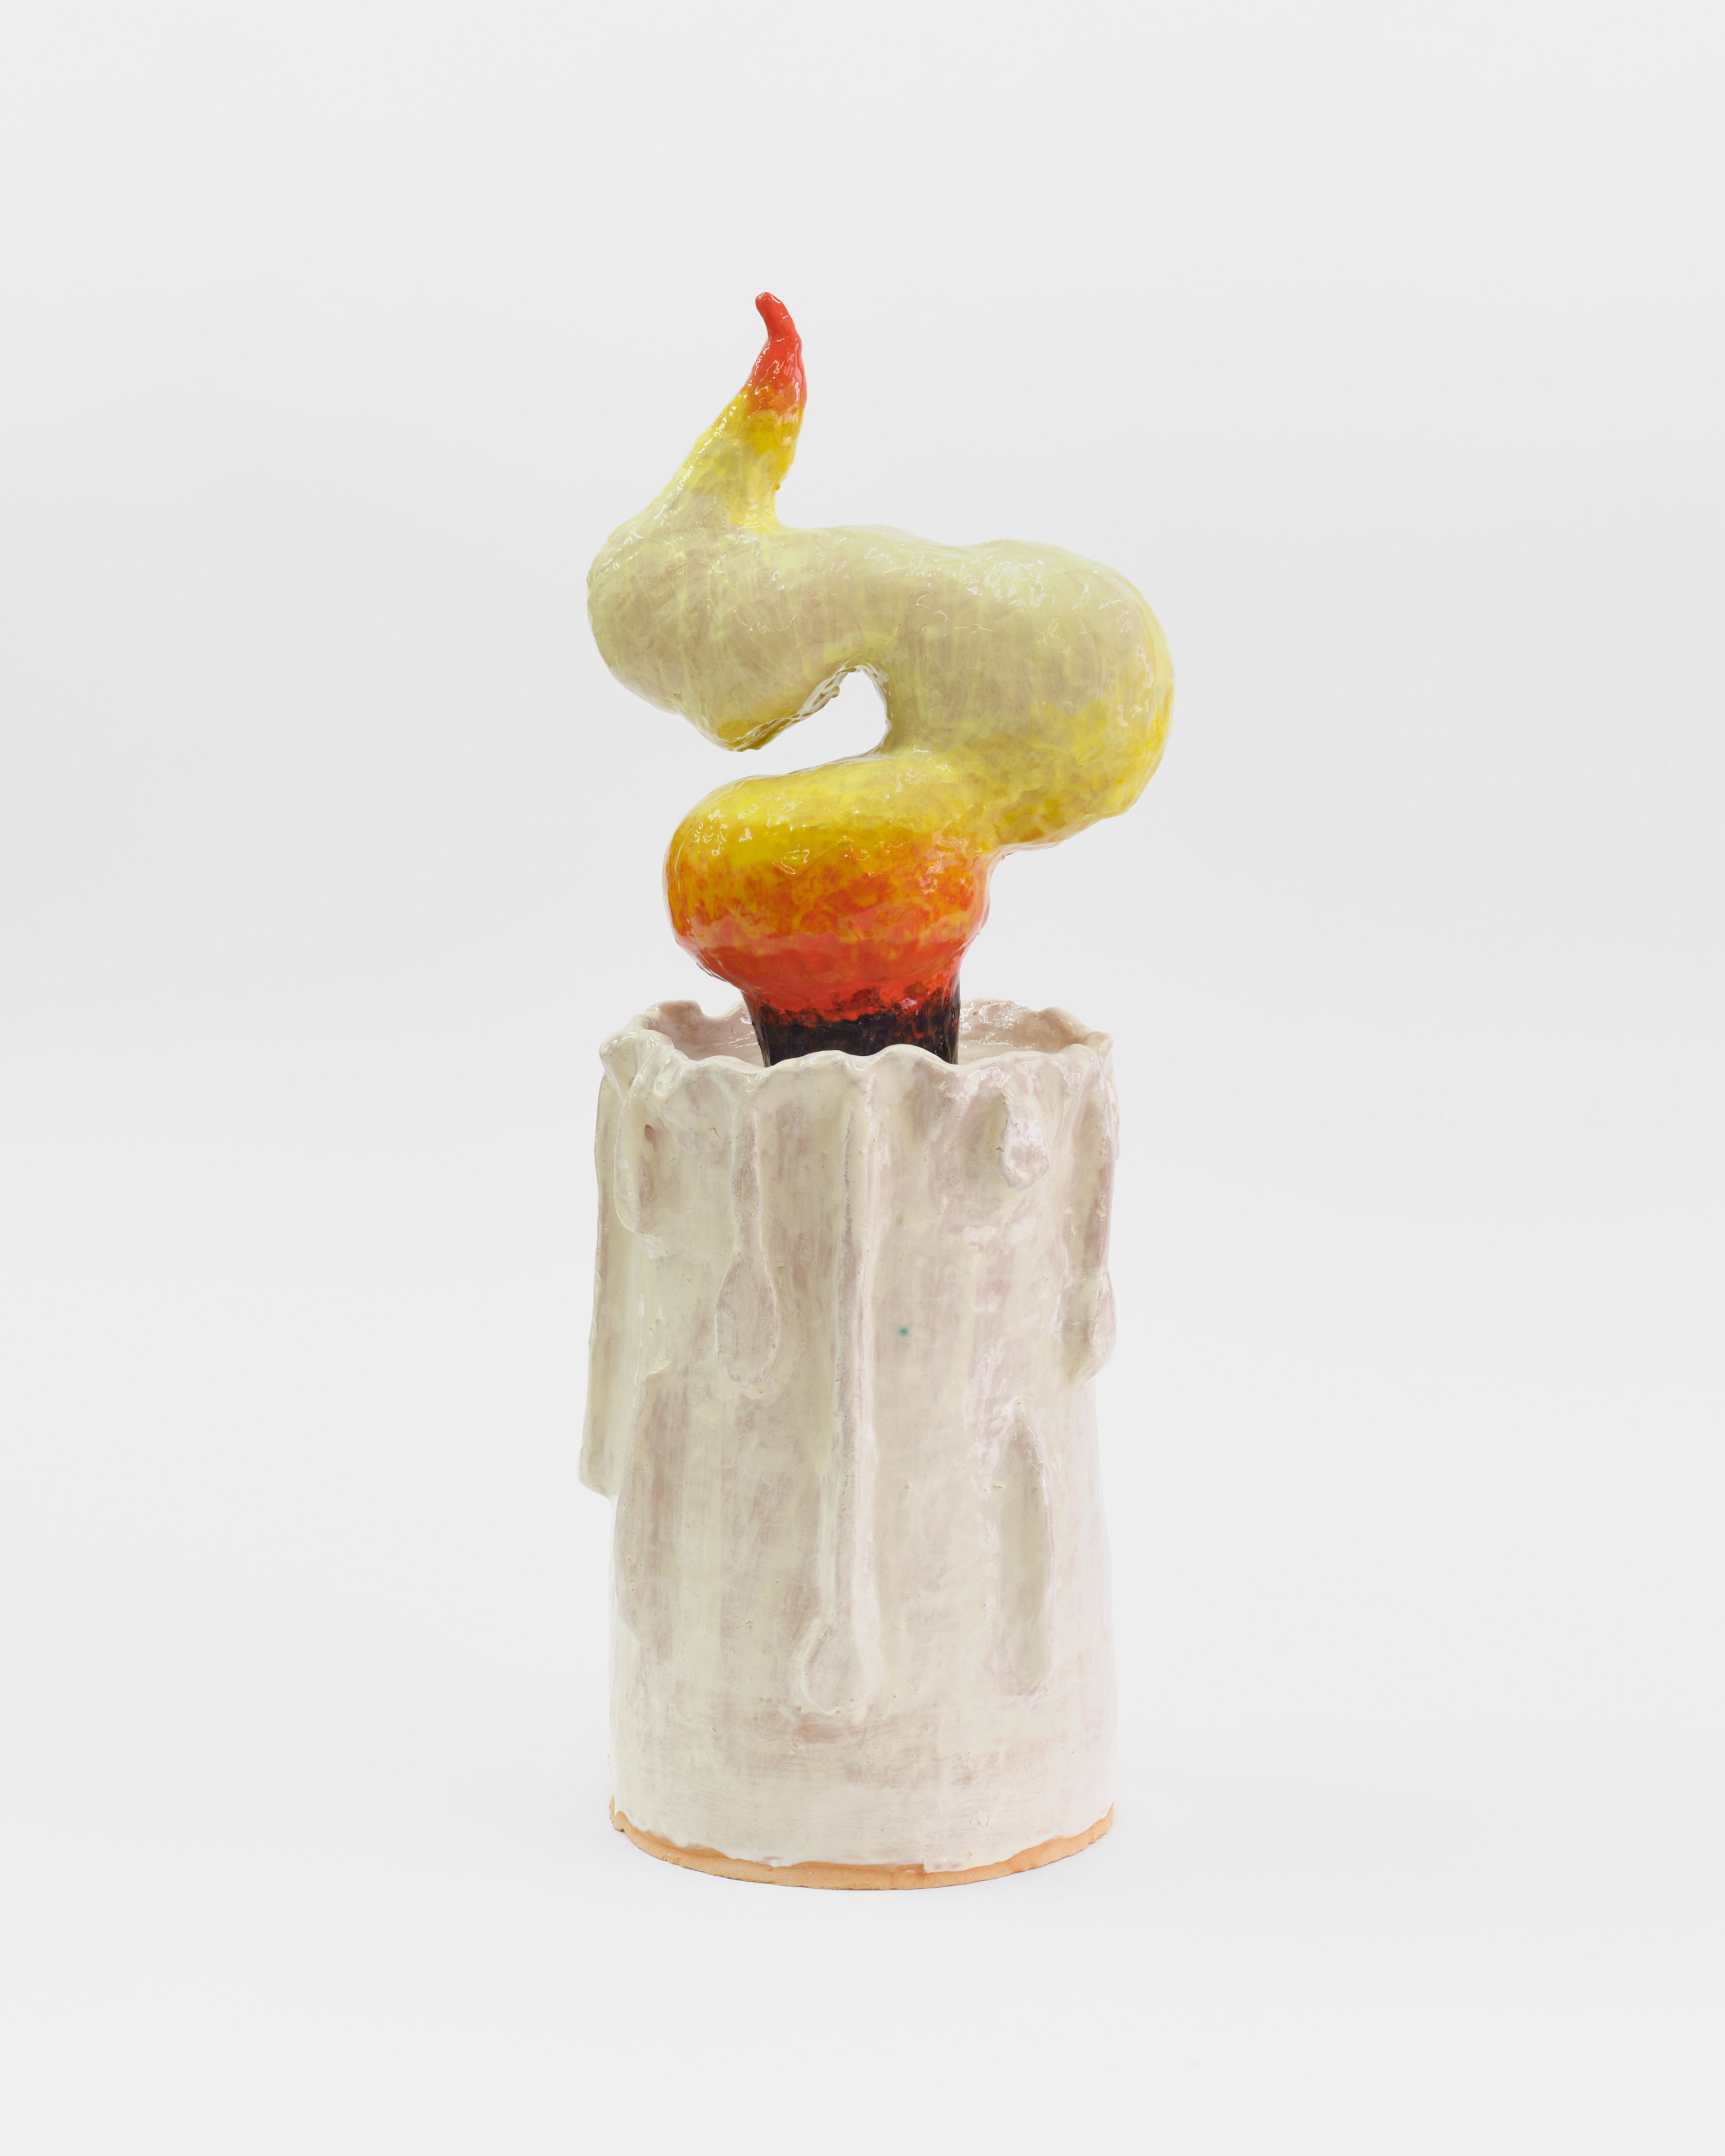 A ceramic sculpture of a large white burning candle.